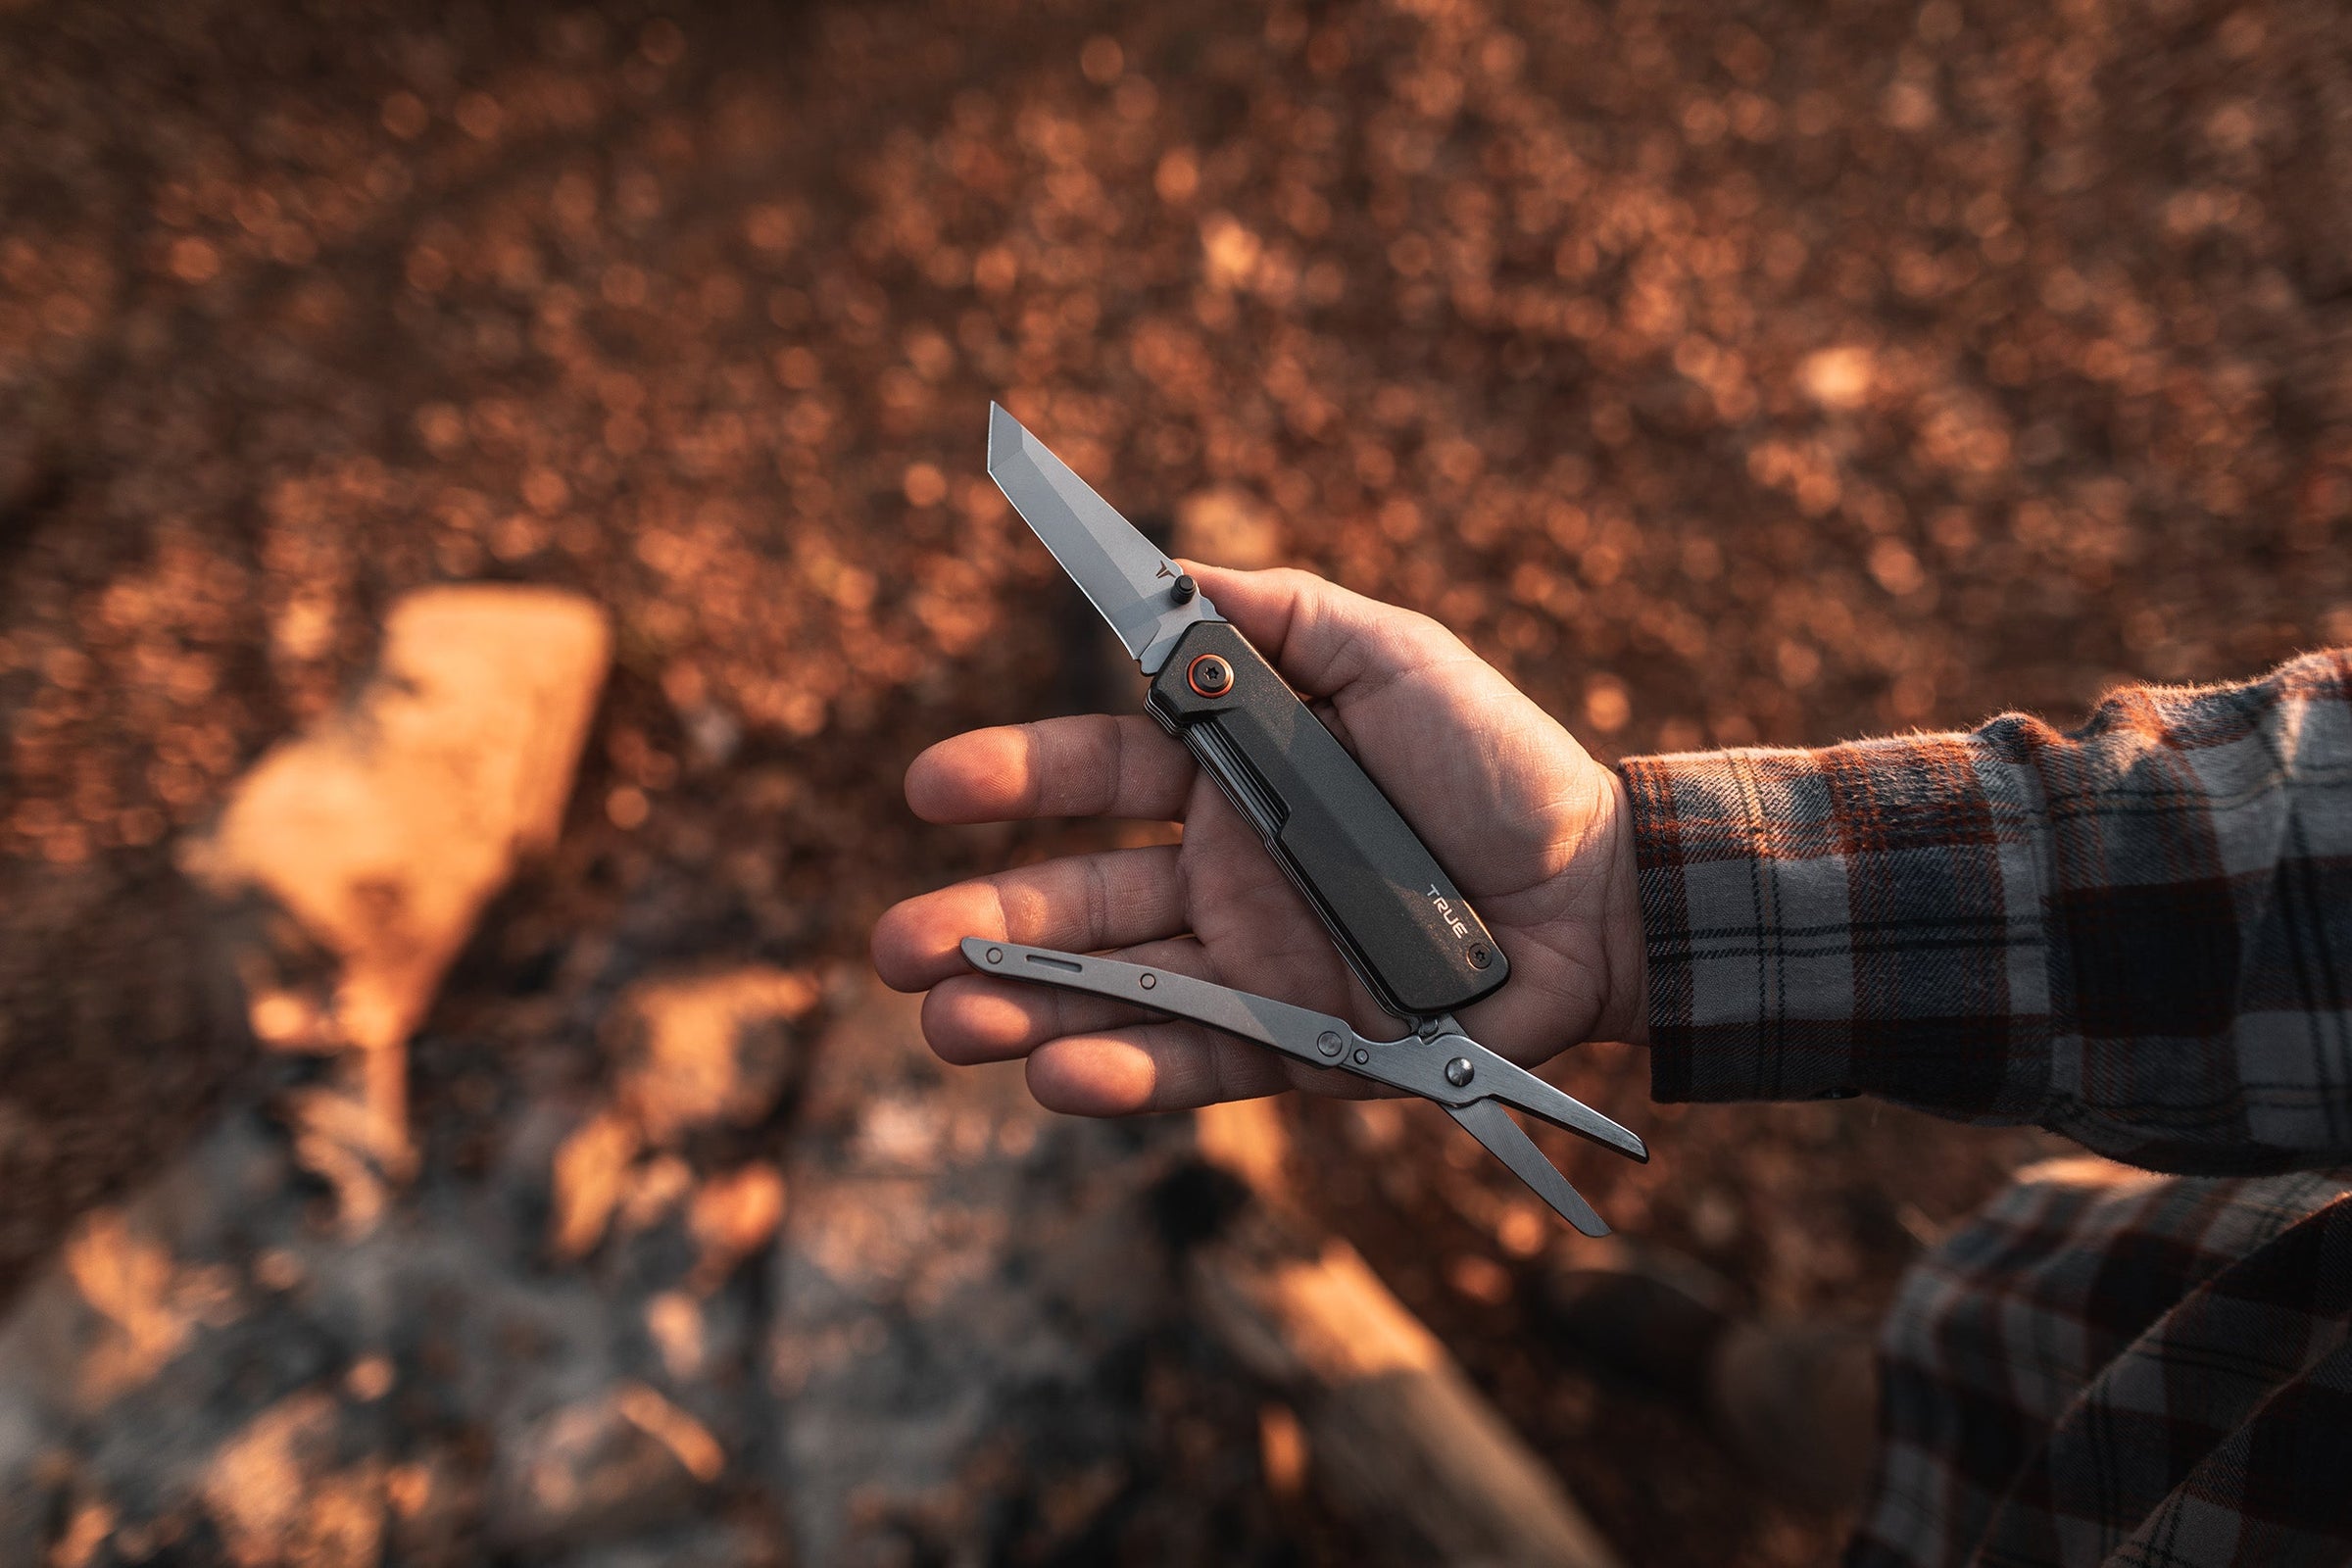 Our Multi tools combine a range functions; screwdrivers, bottle openers to pliers and knives. True Utility Multitools